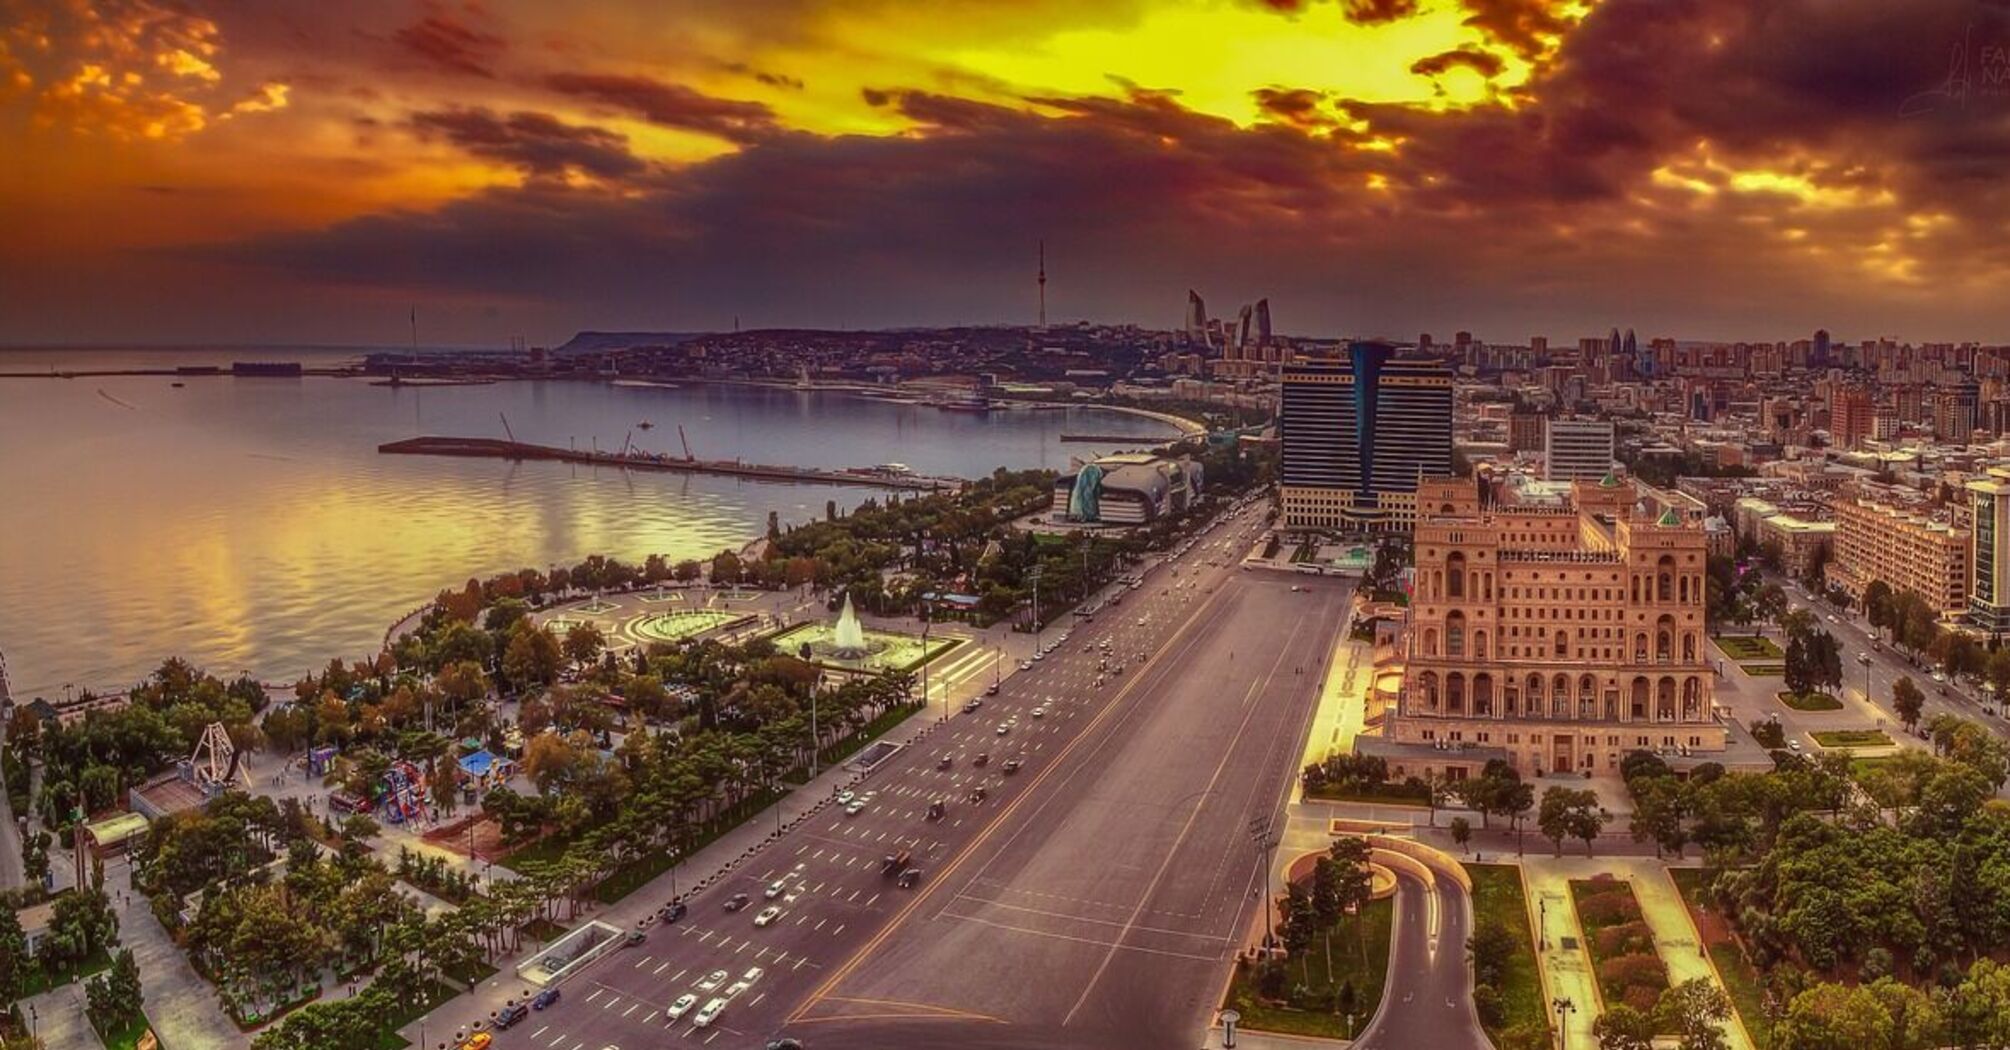 TripAdvisor has included Baku in the list of the best places to eat